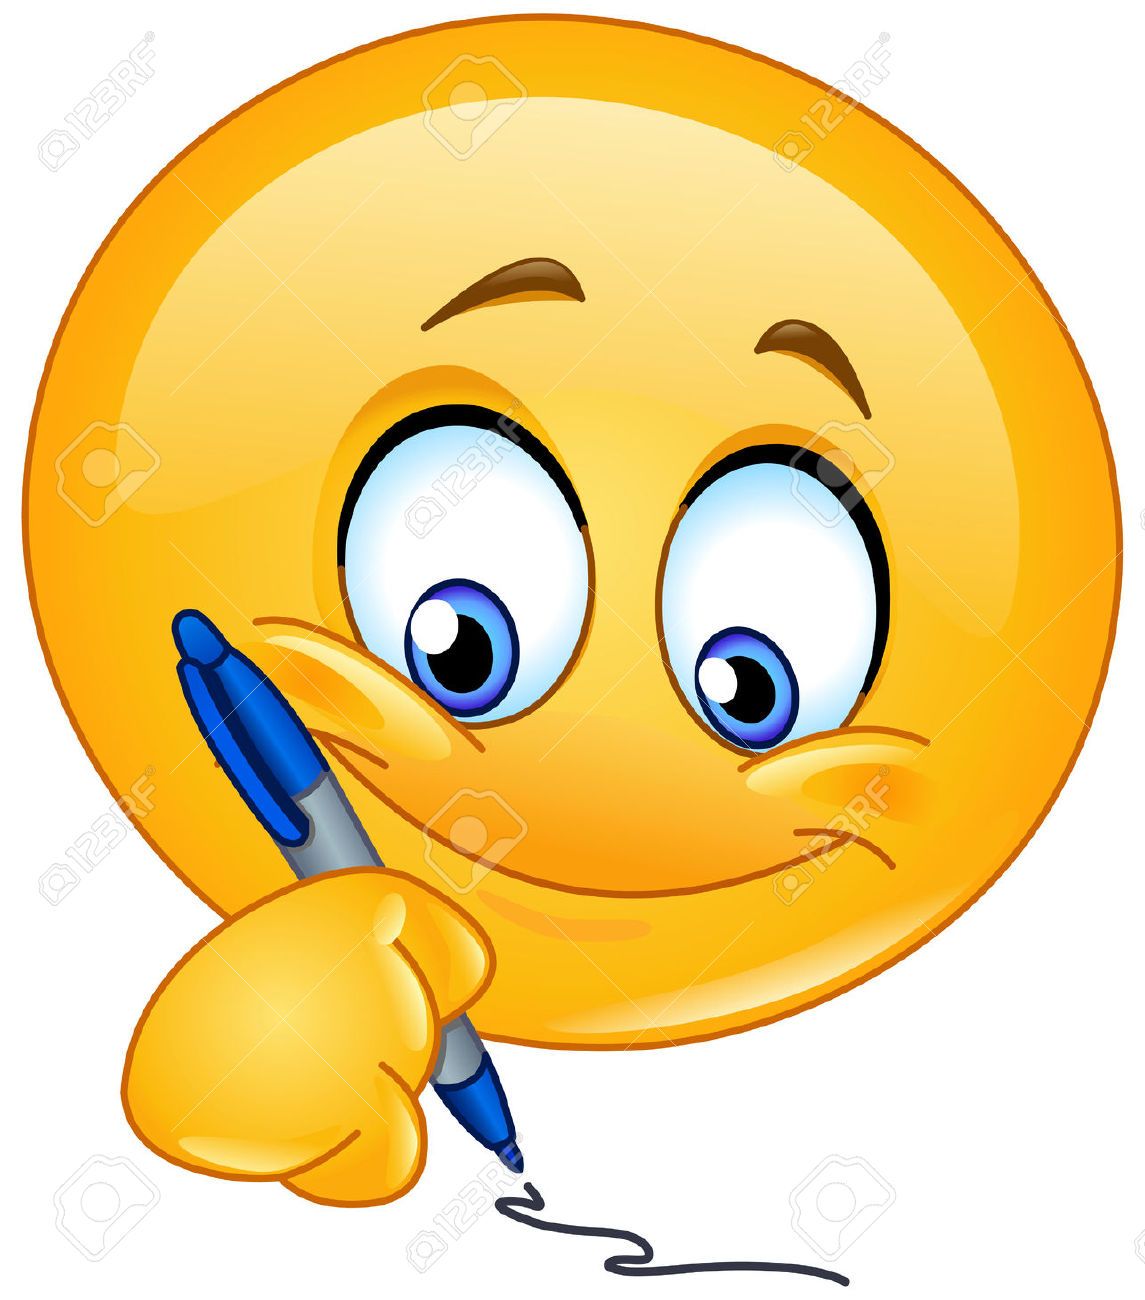 Smiley clipart writing. Emoticon royalty free cliparts